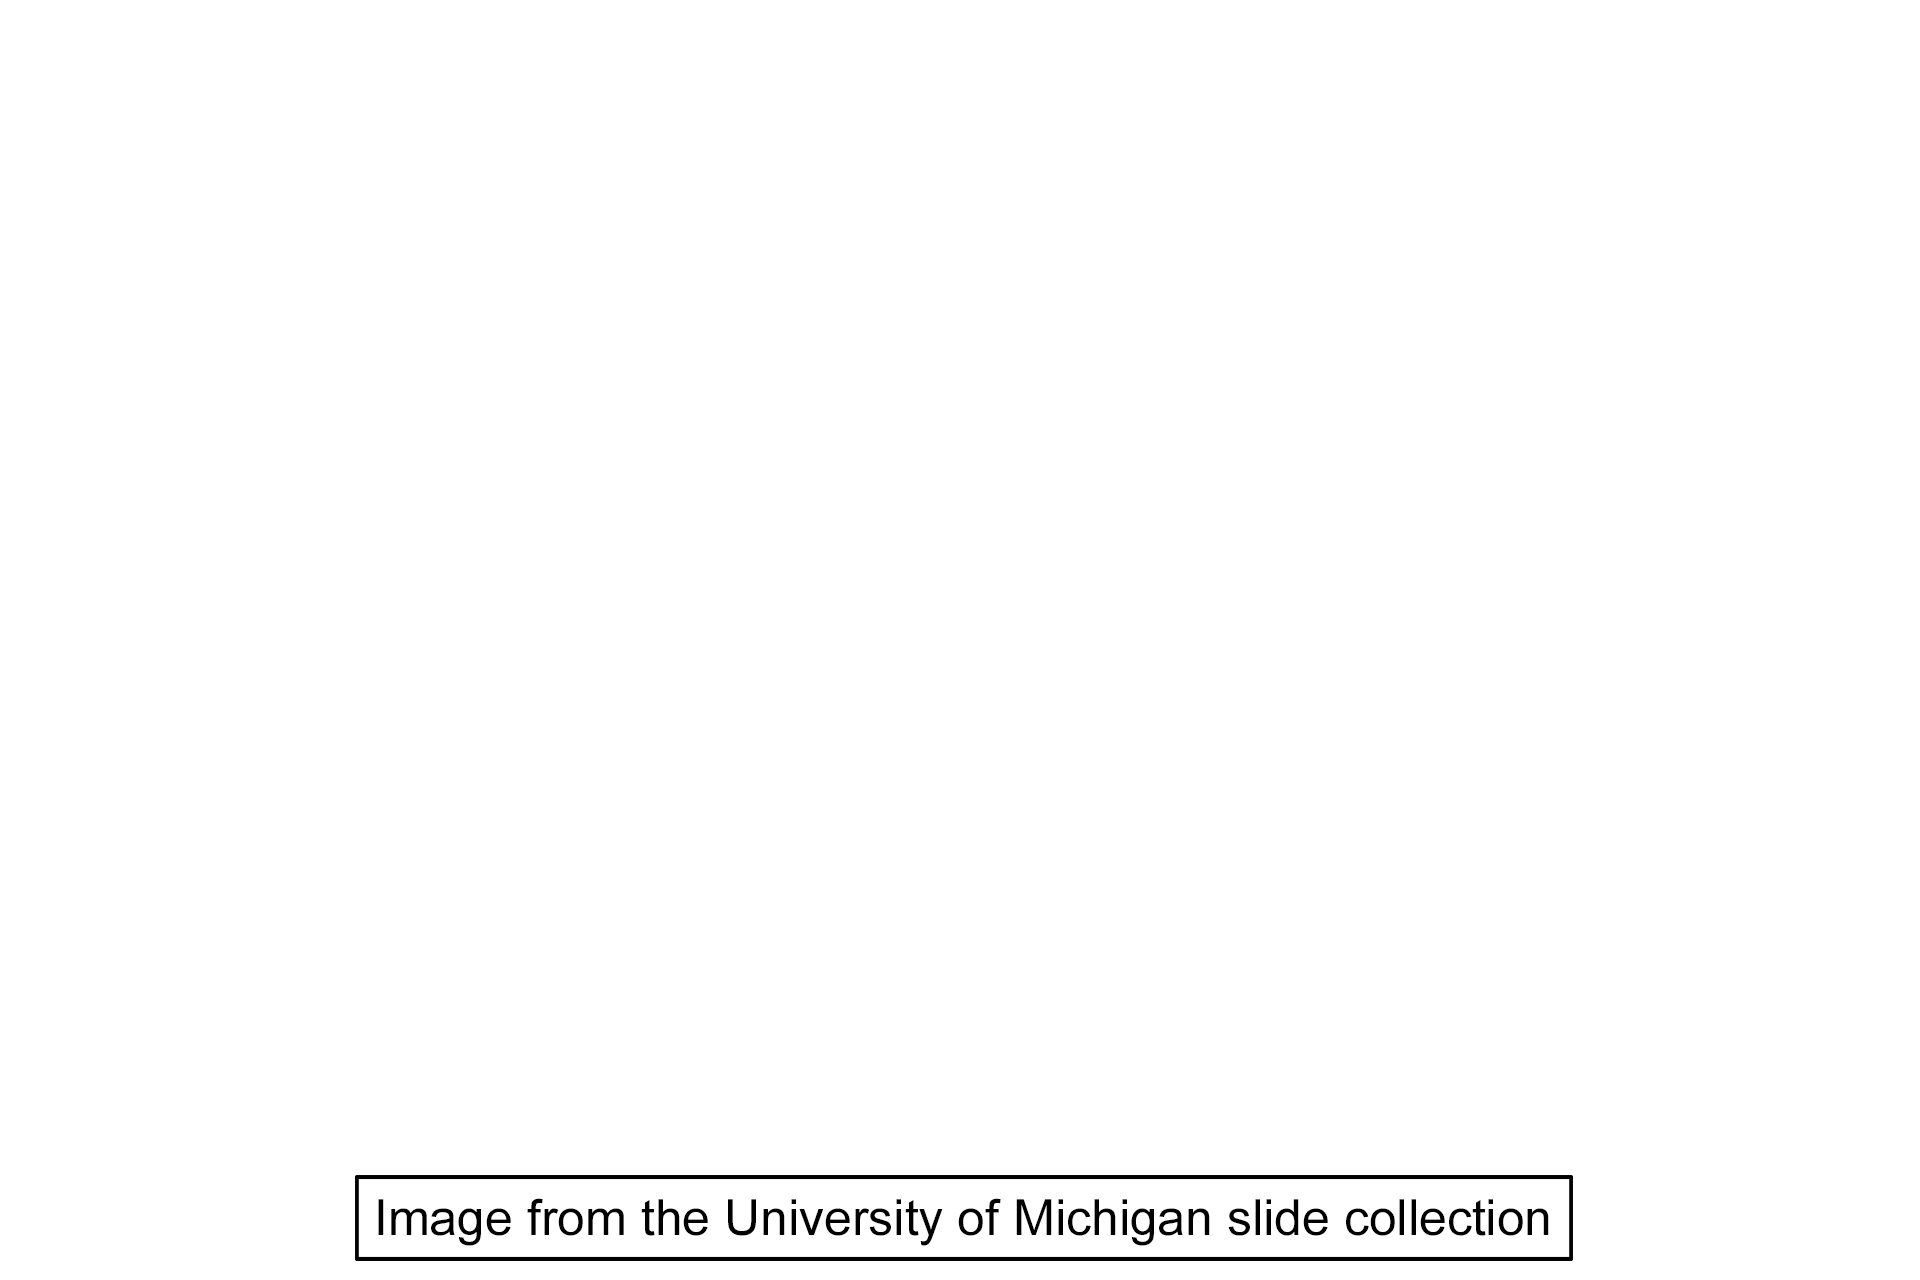 Image credit <p>This image was taken from The University of Michigan collection.</p>
